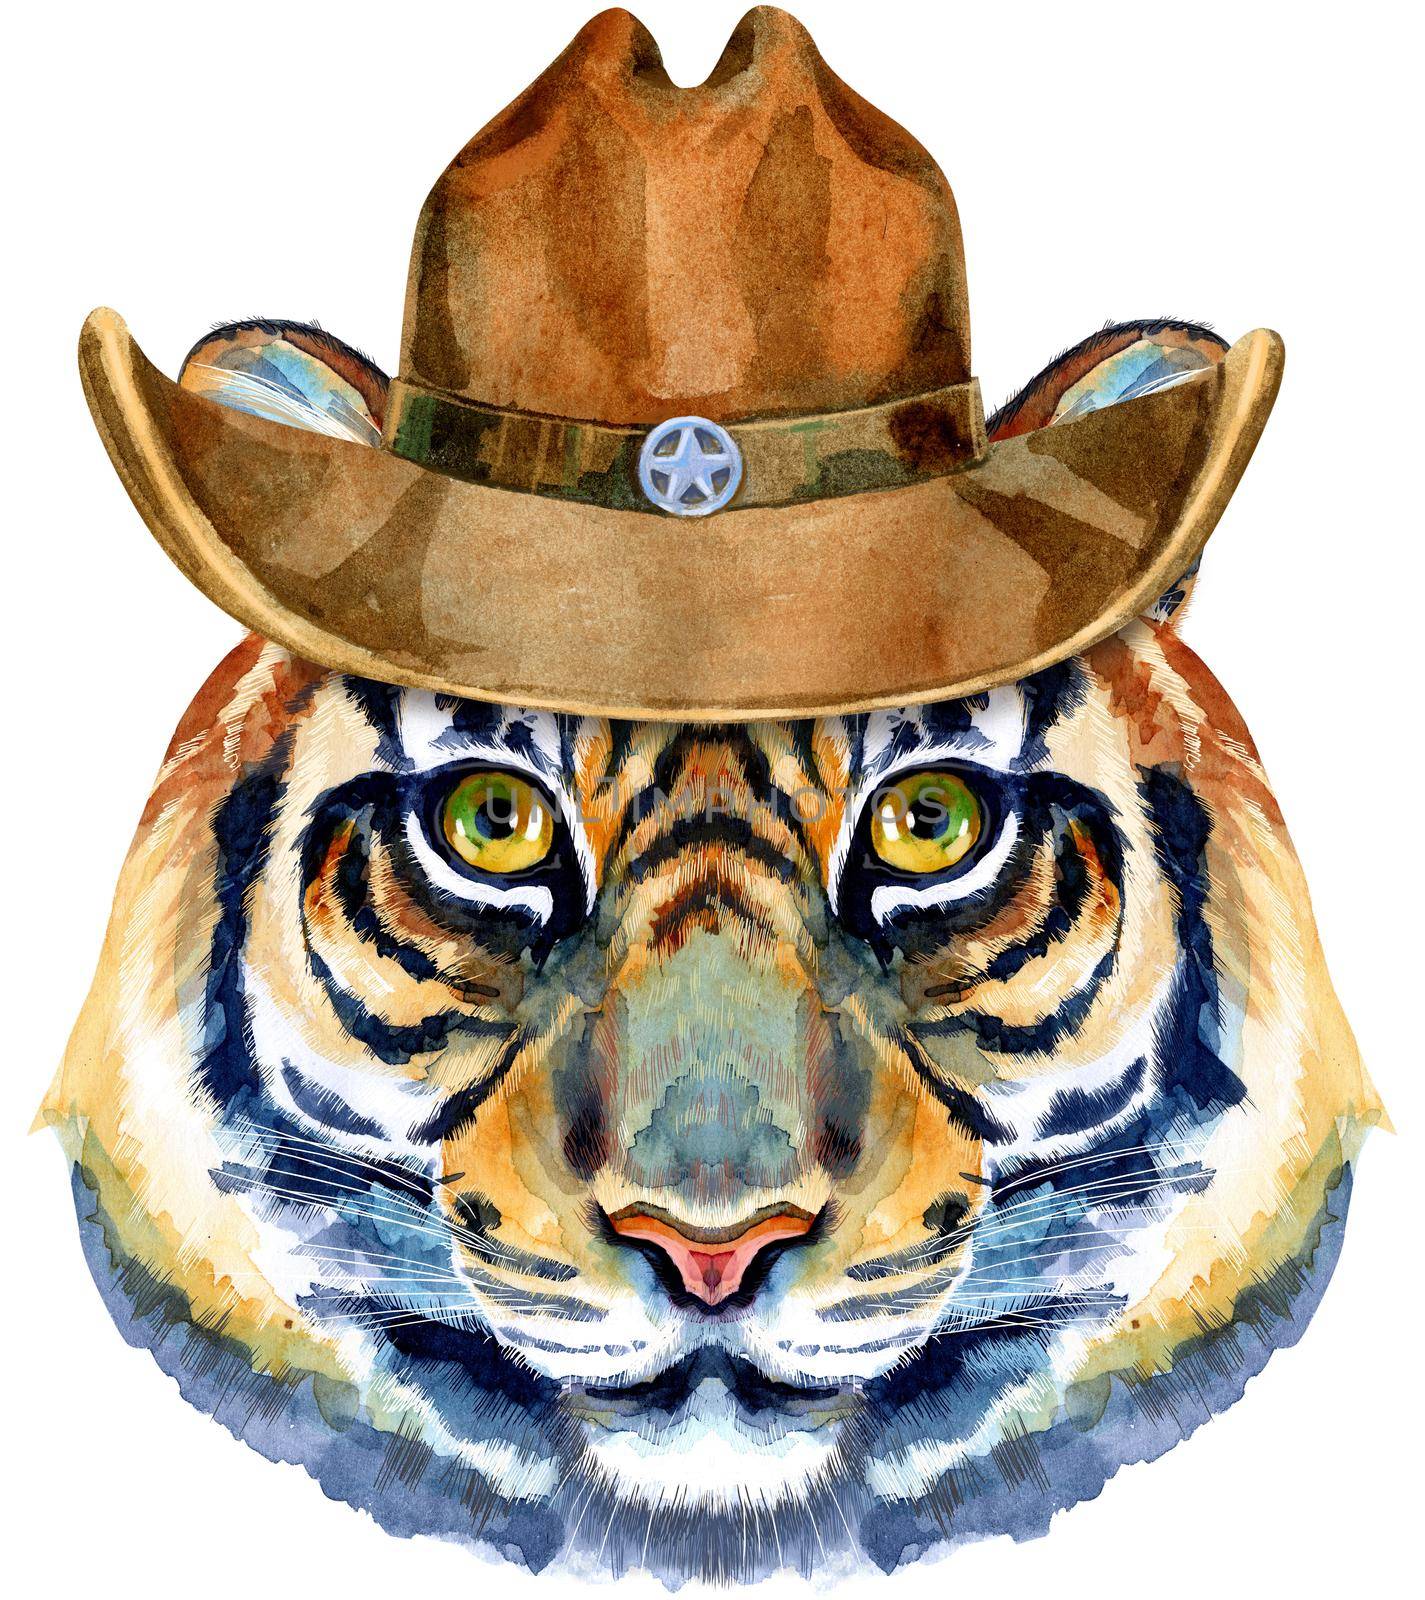 Tiger horoscope character watercolor illustration in cowboy hat isolated on white background. by NataOmsk